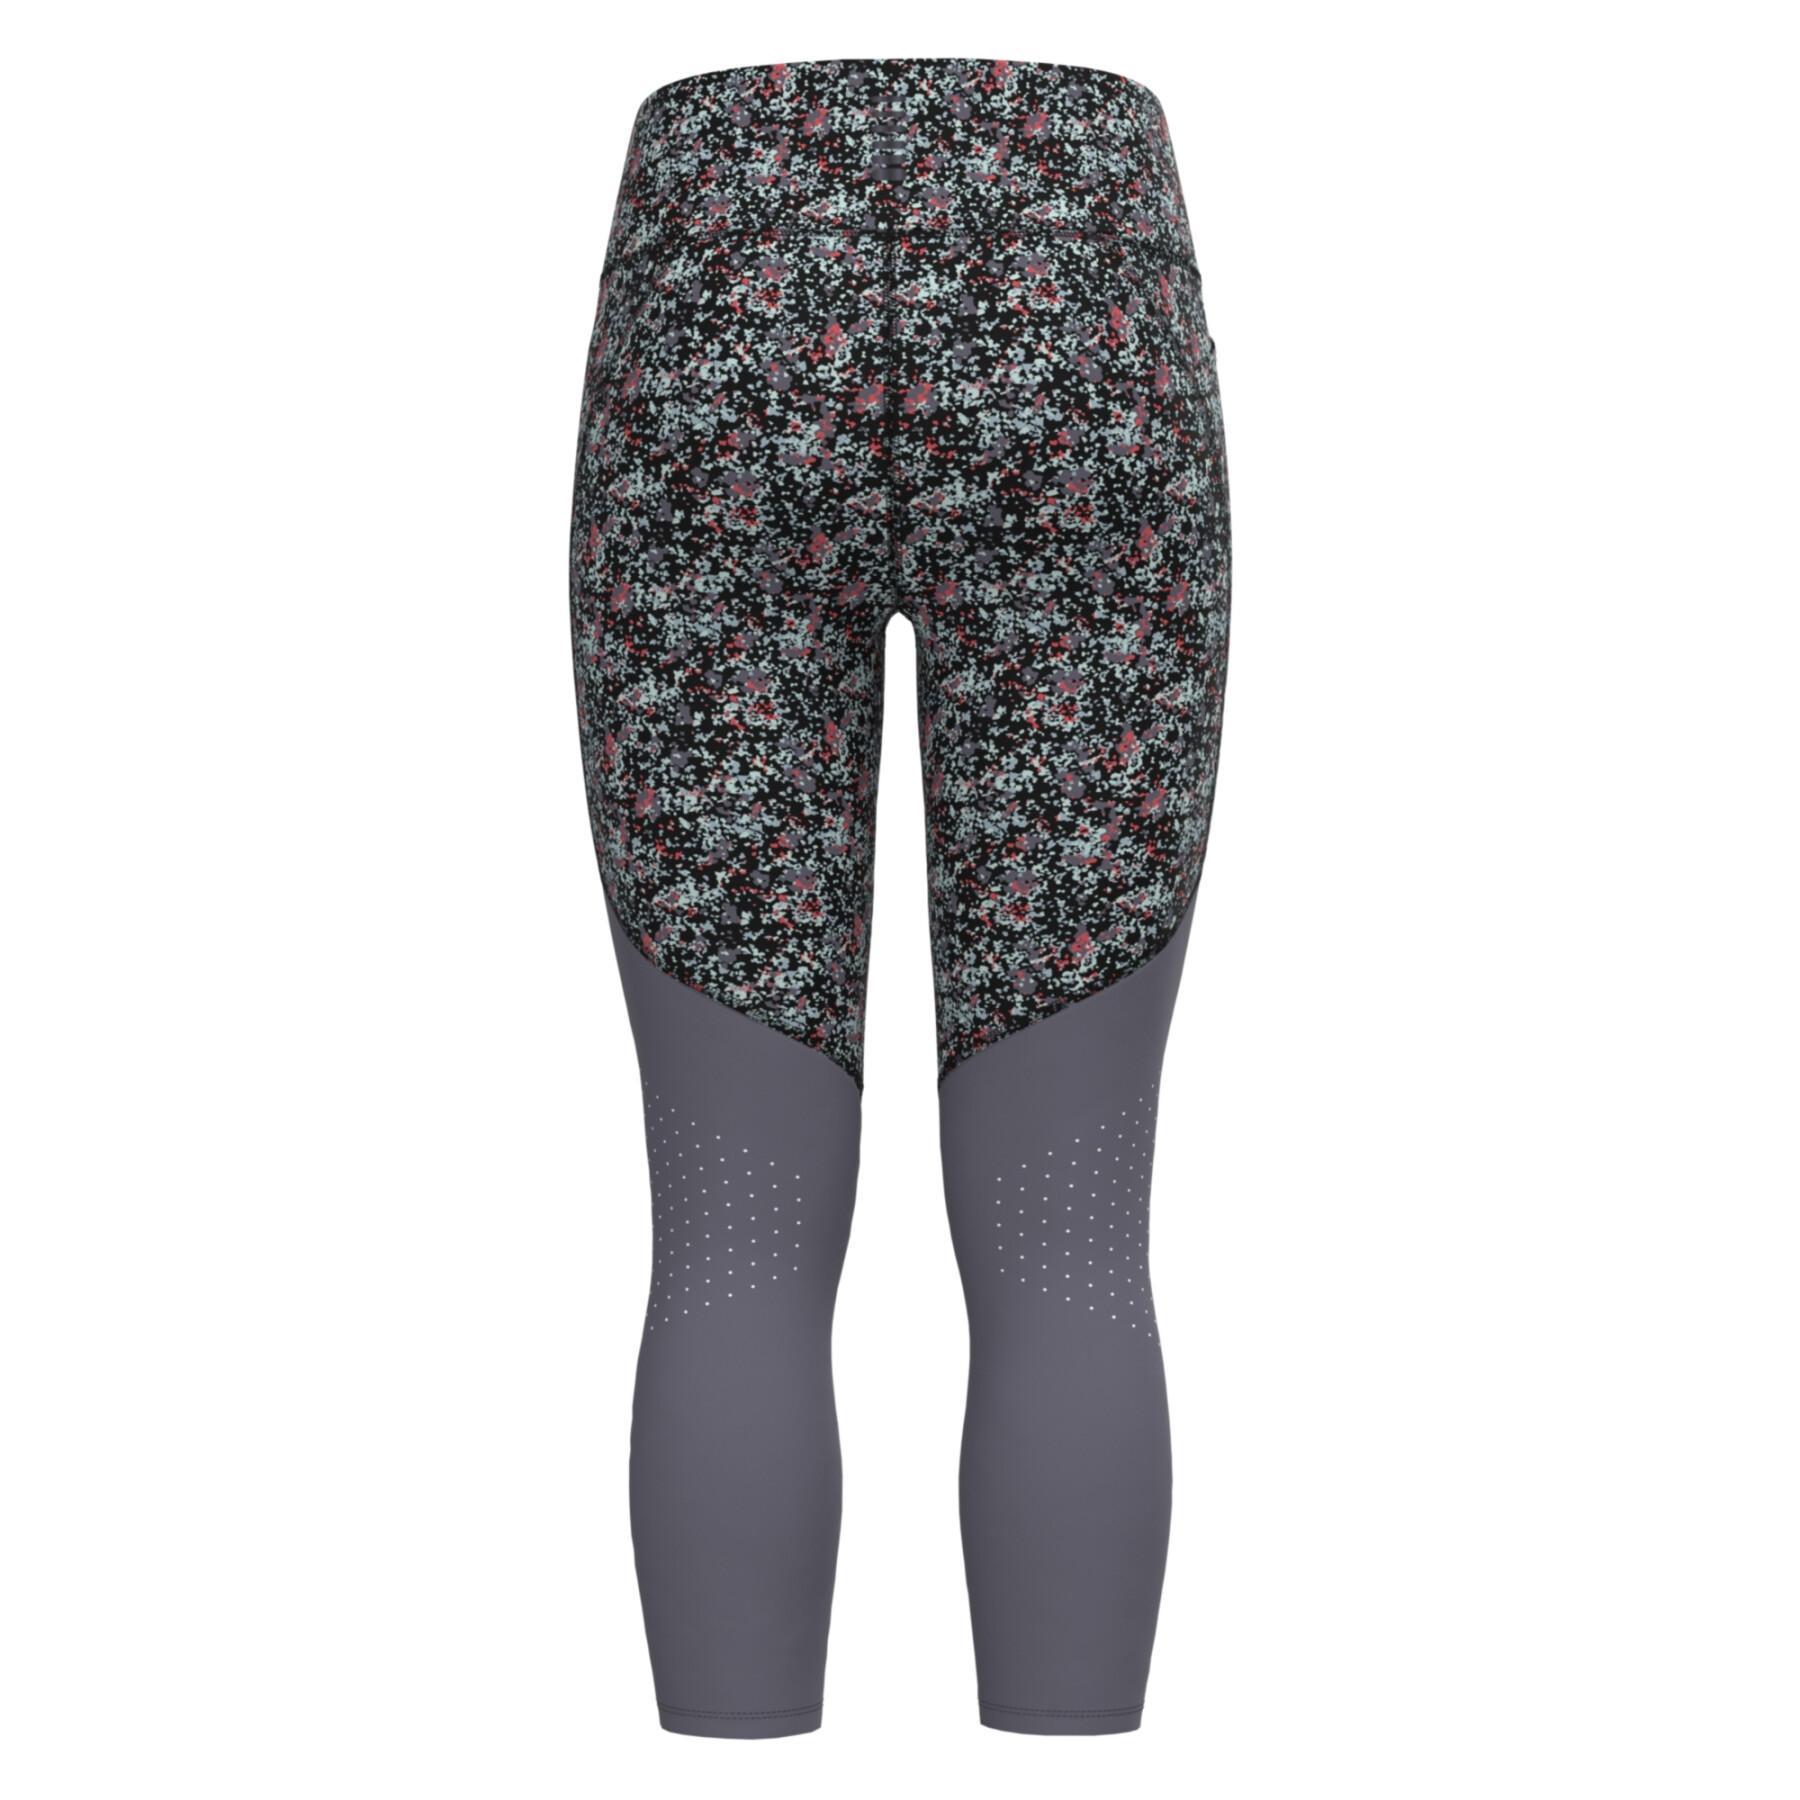 Women's Legging Under Armour Fly Fast Ankle II